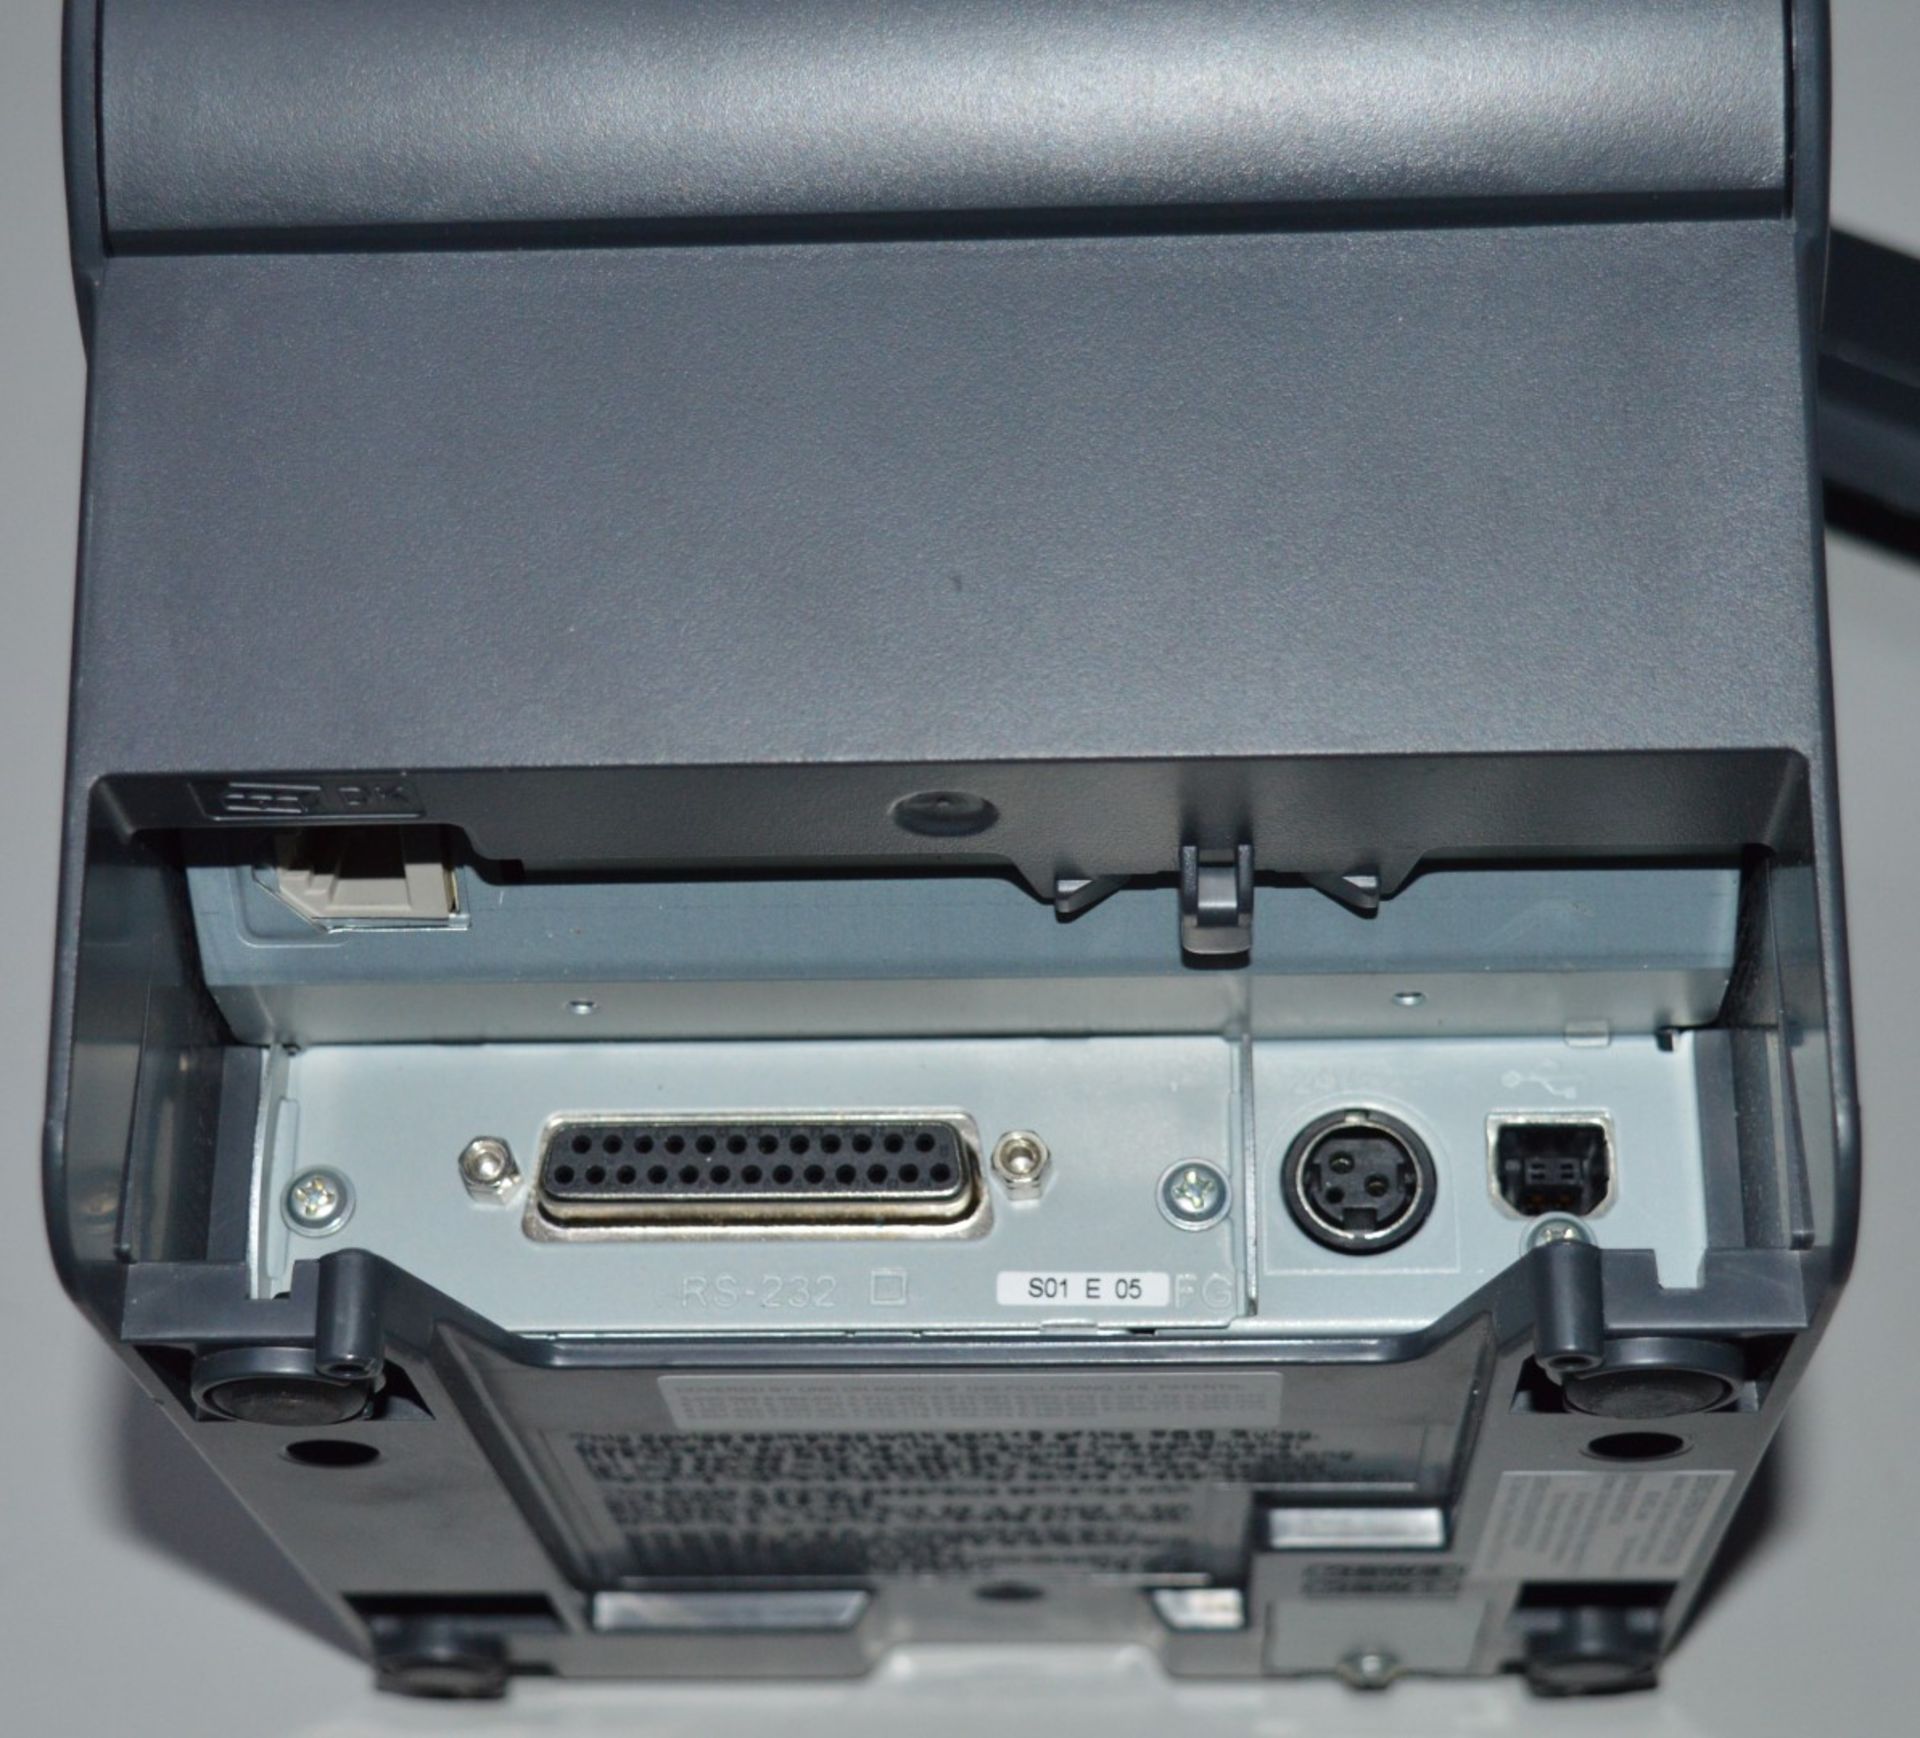 1 x Epson TM-T88V M244A Thermal Receipt Printer With USB - Includes Connection/Power Cable - CL285 - - Image 6 of 7